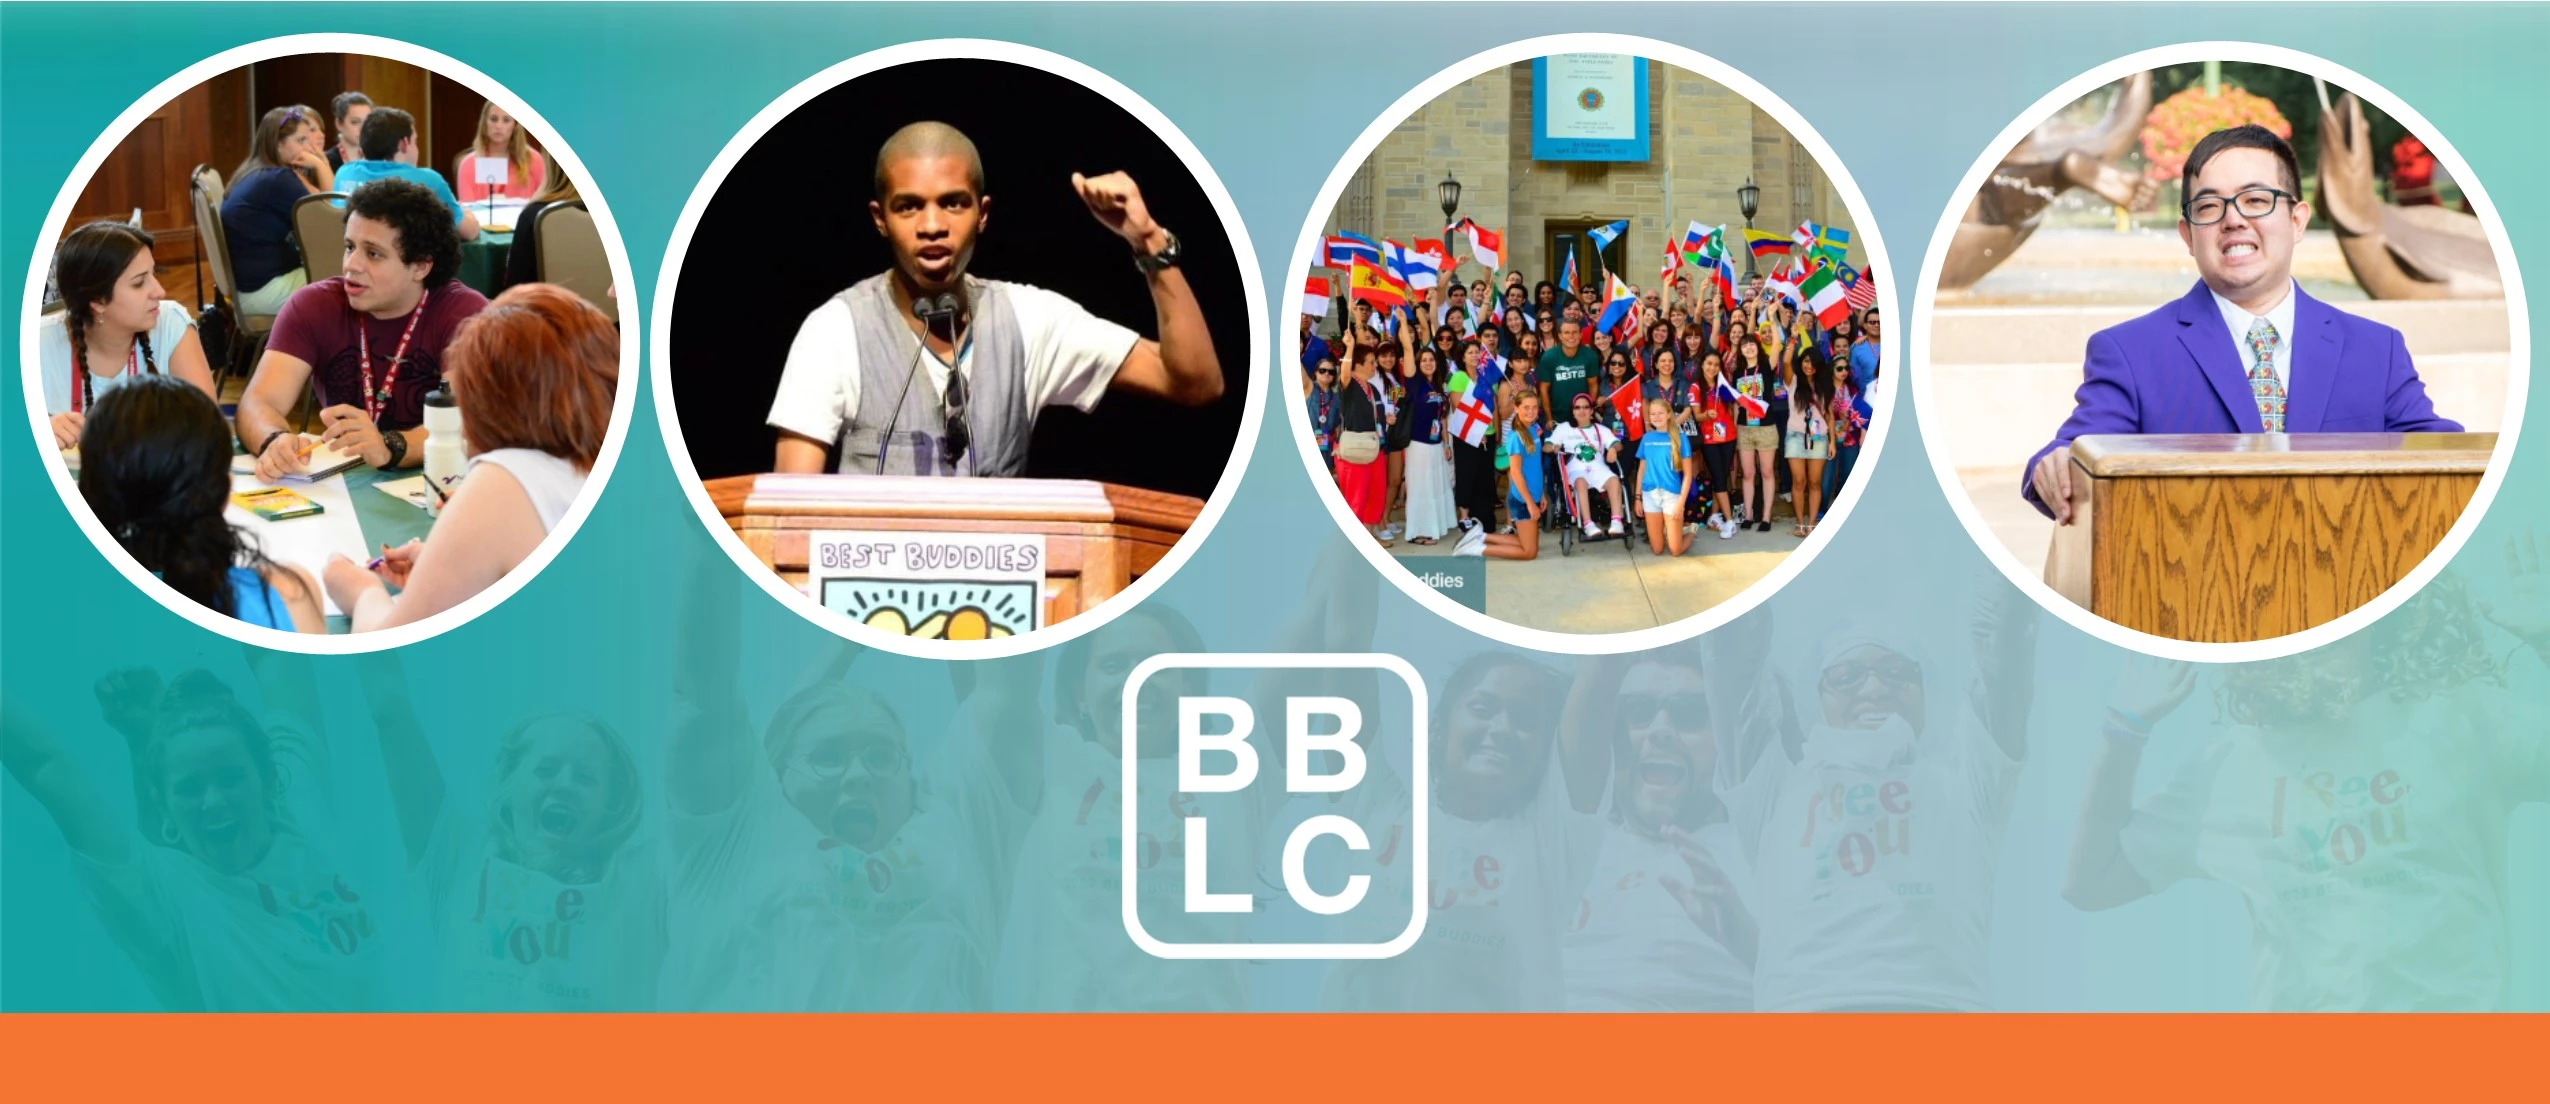 BBLC Community Leaders footer image